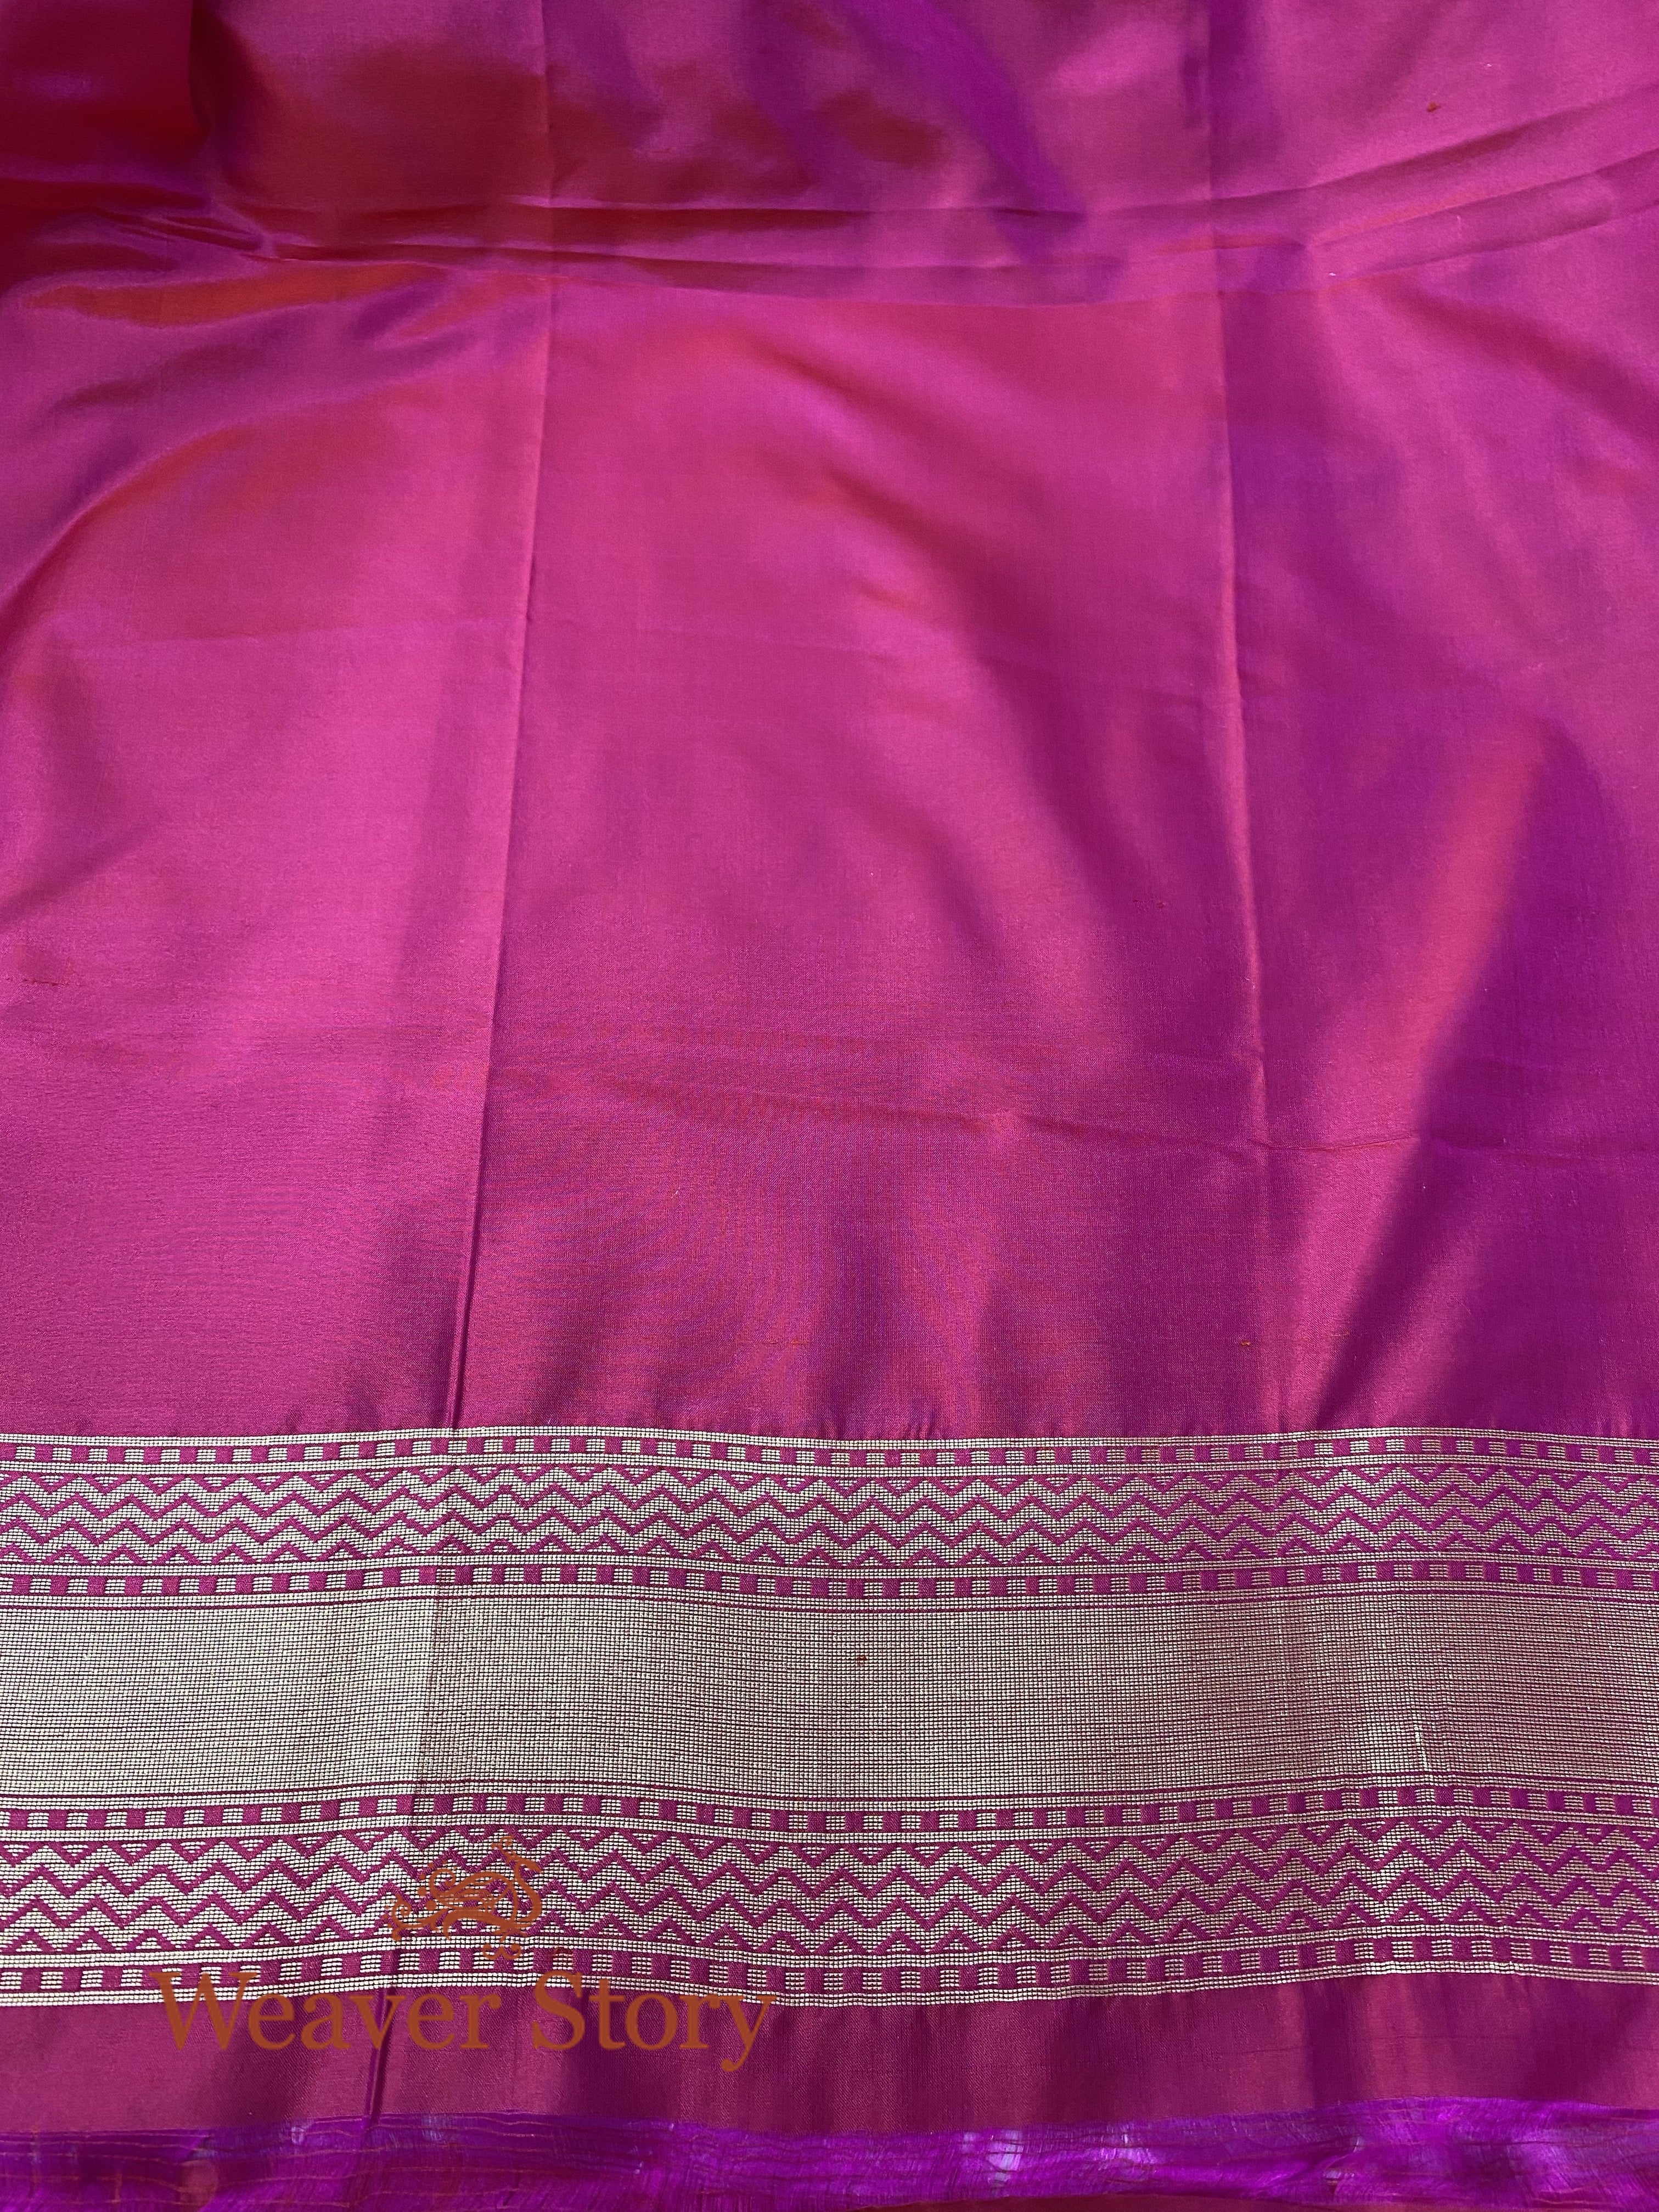 Handwoven_Banarasi_Patola_Saree_in_Red_with_a_Contrast_Blouse_WeaverStory_06